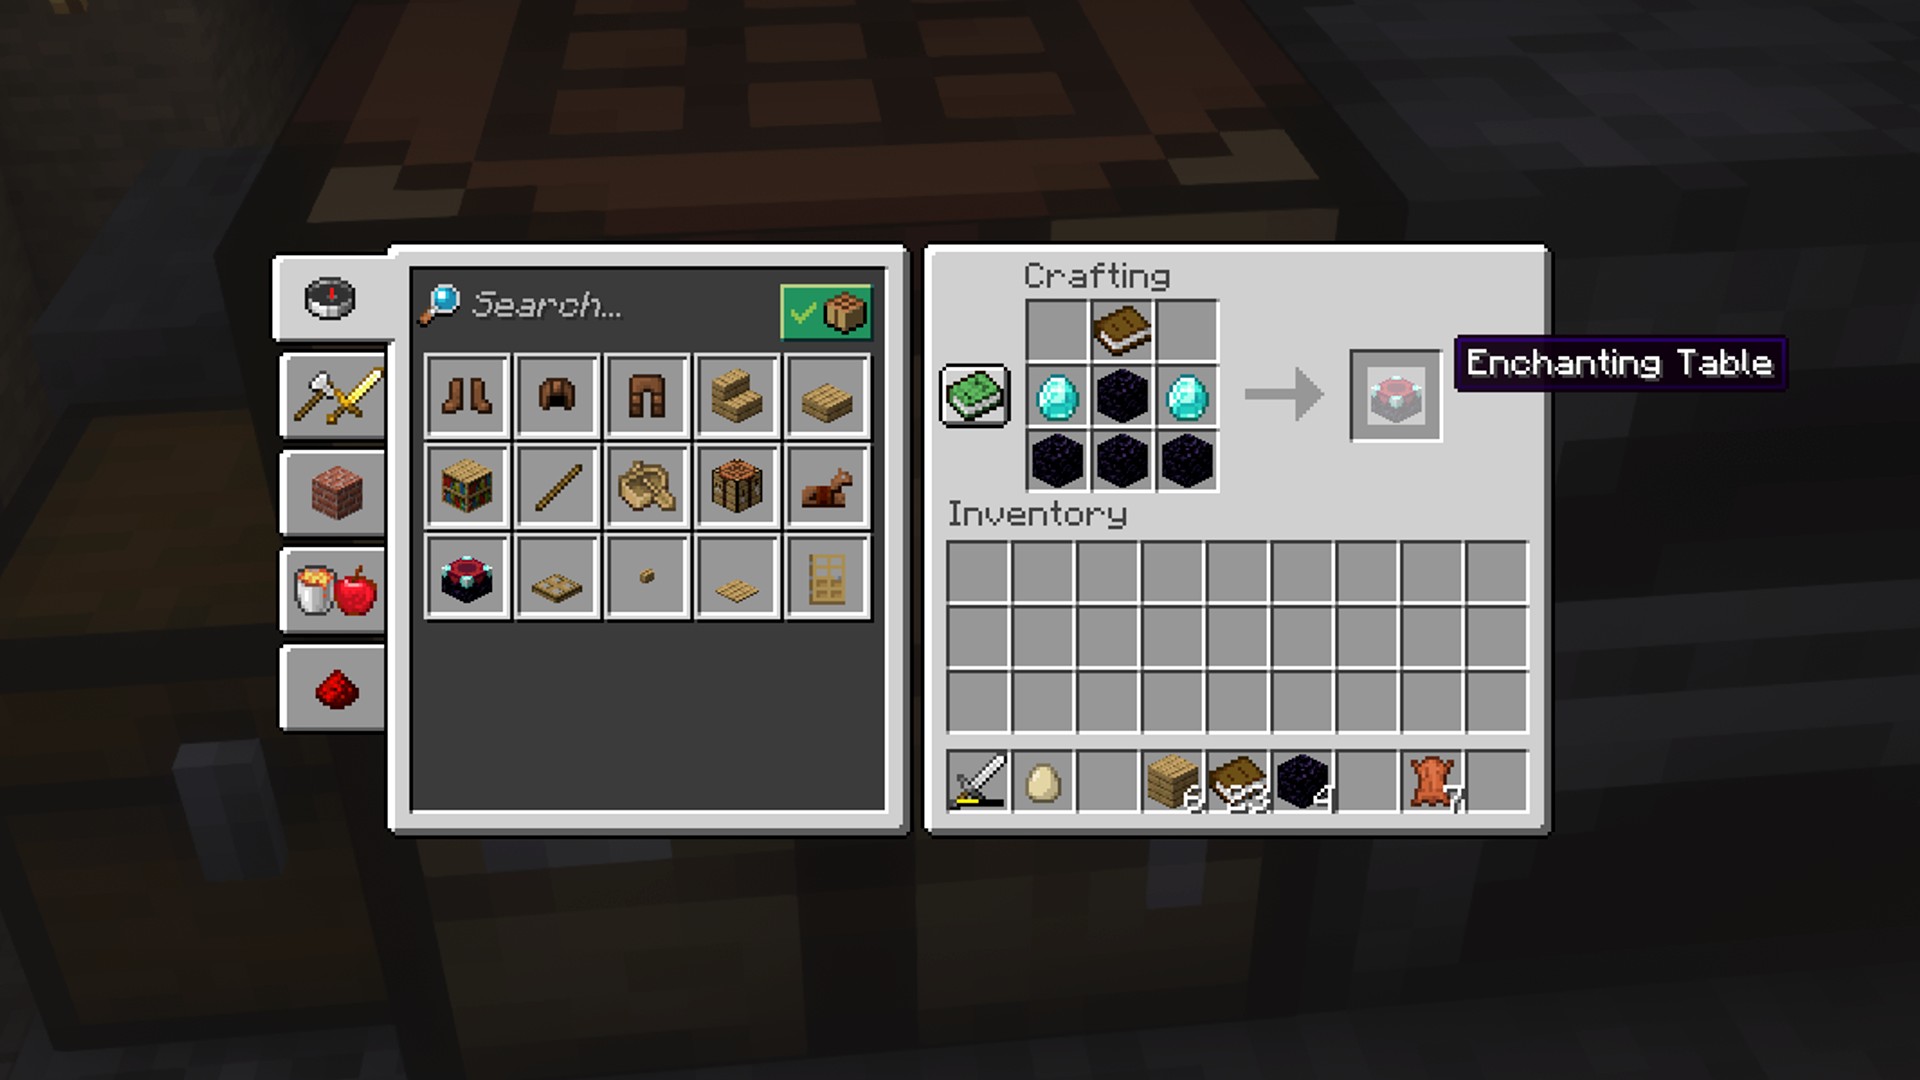 How to Get the Best Enchantment in Minecraft (with Pictures)